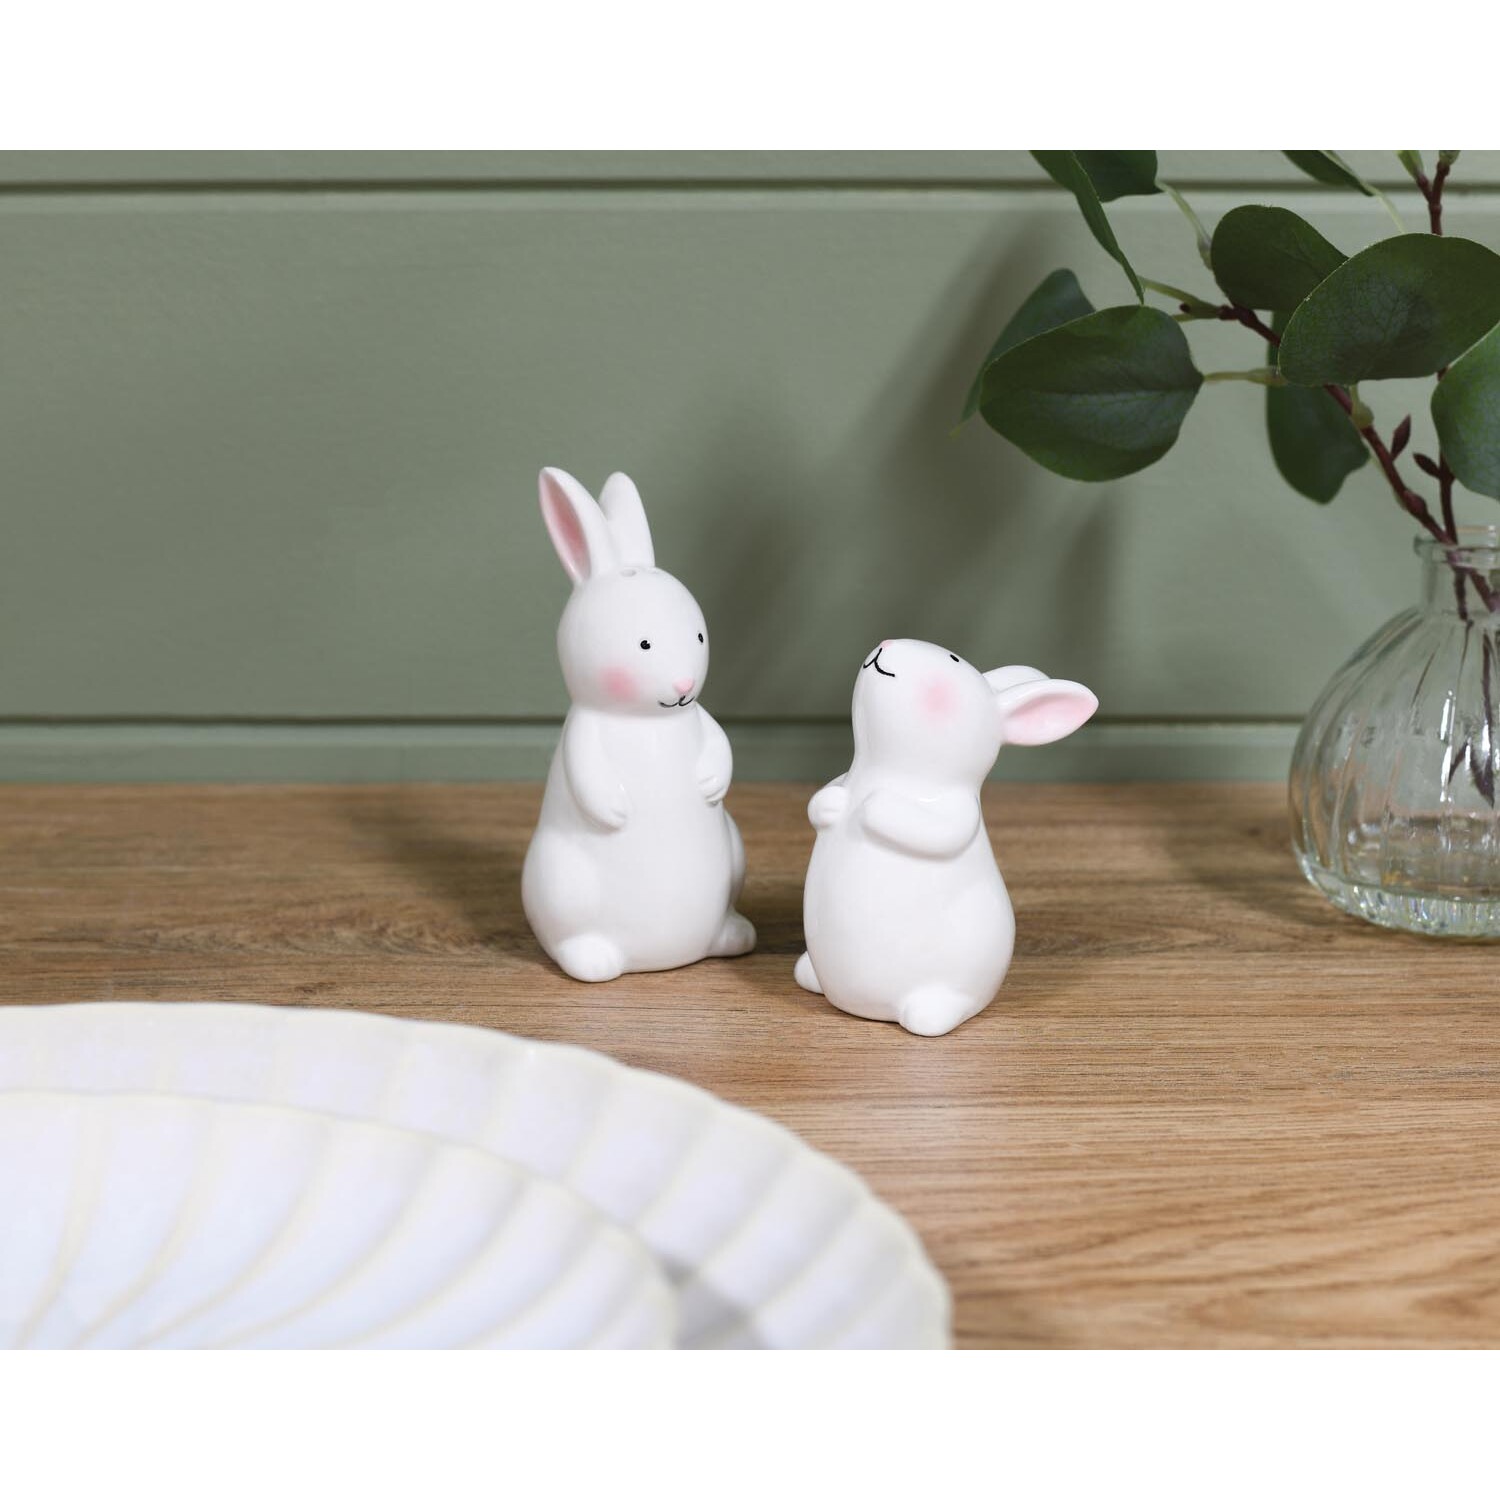 Bunny Salt and Pepper Shakers - White Image 5